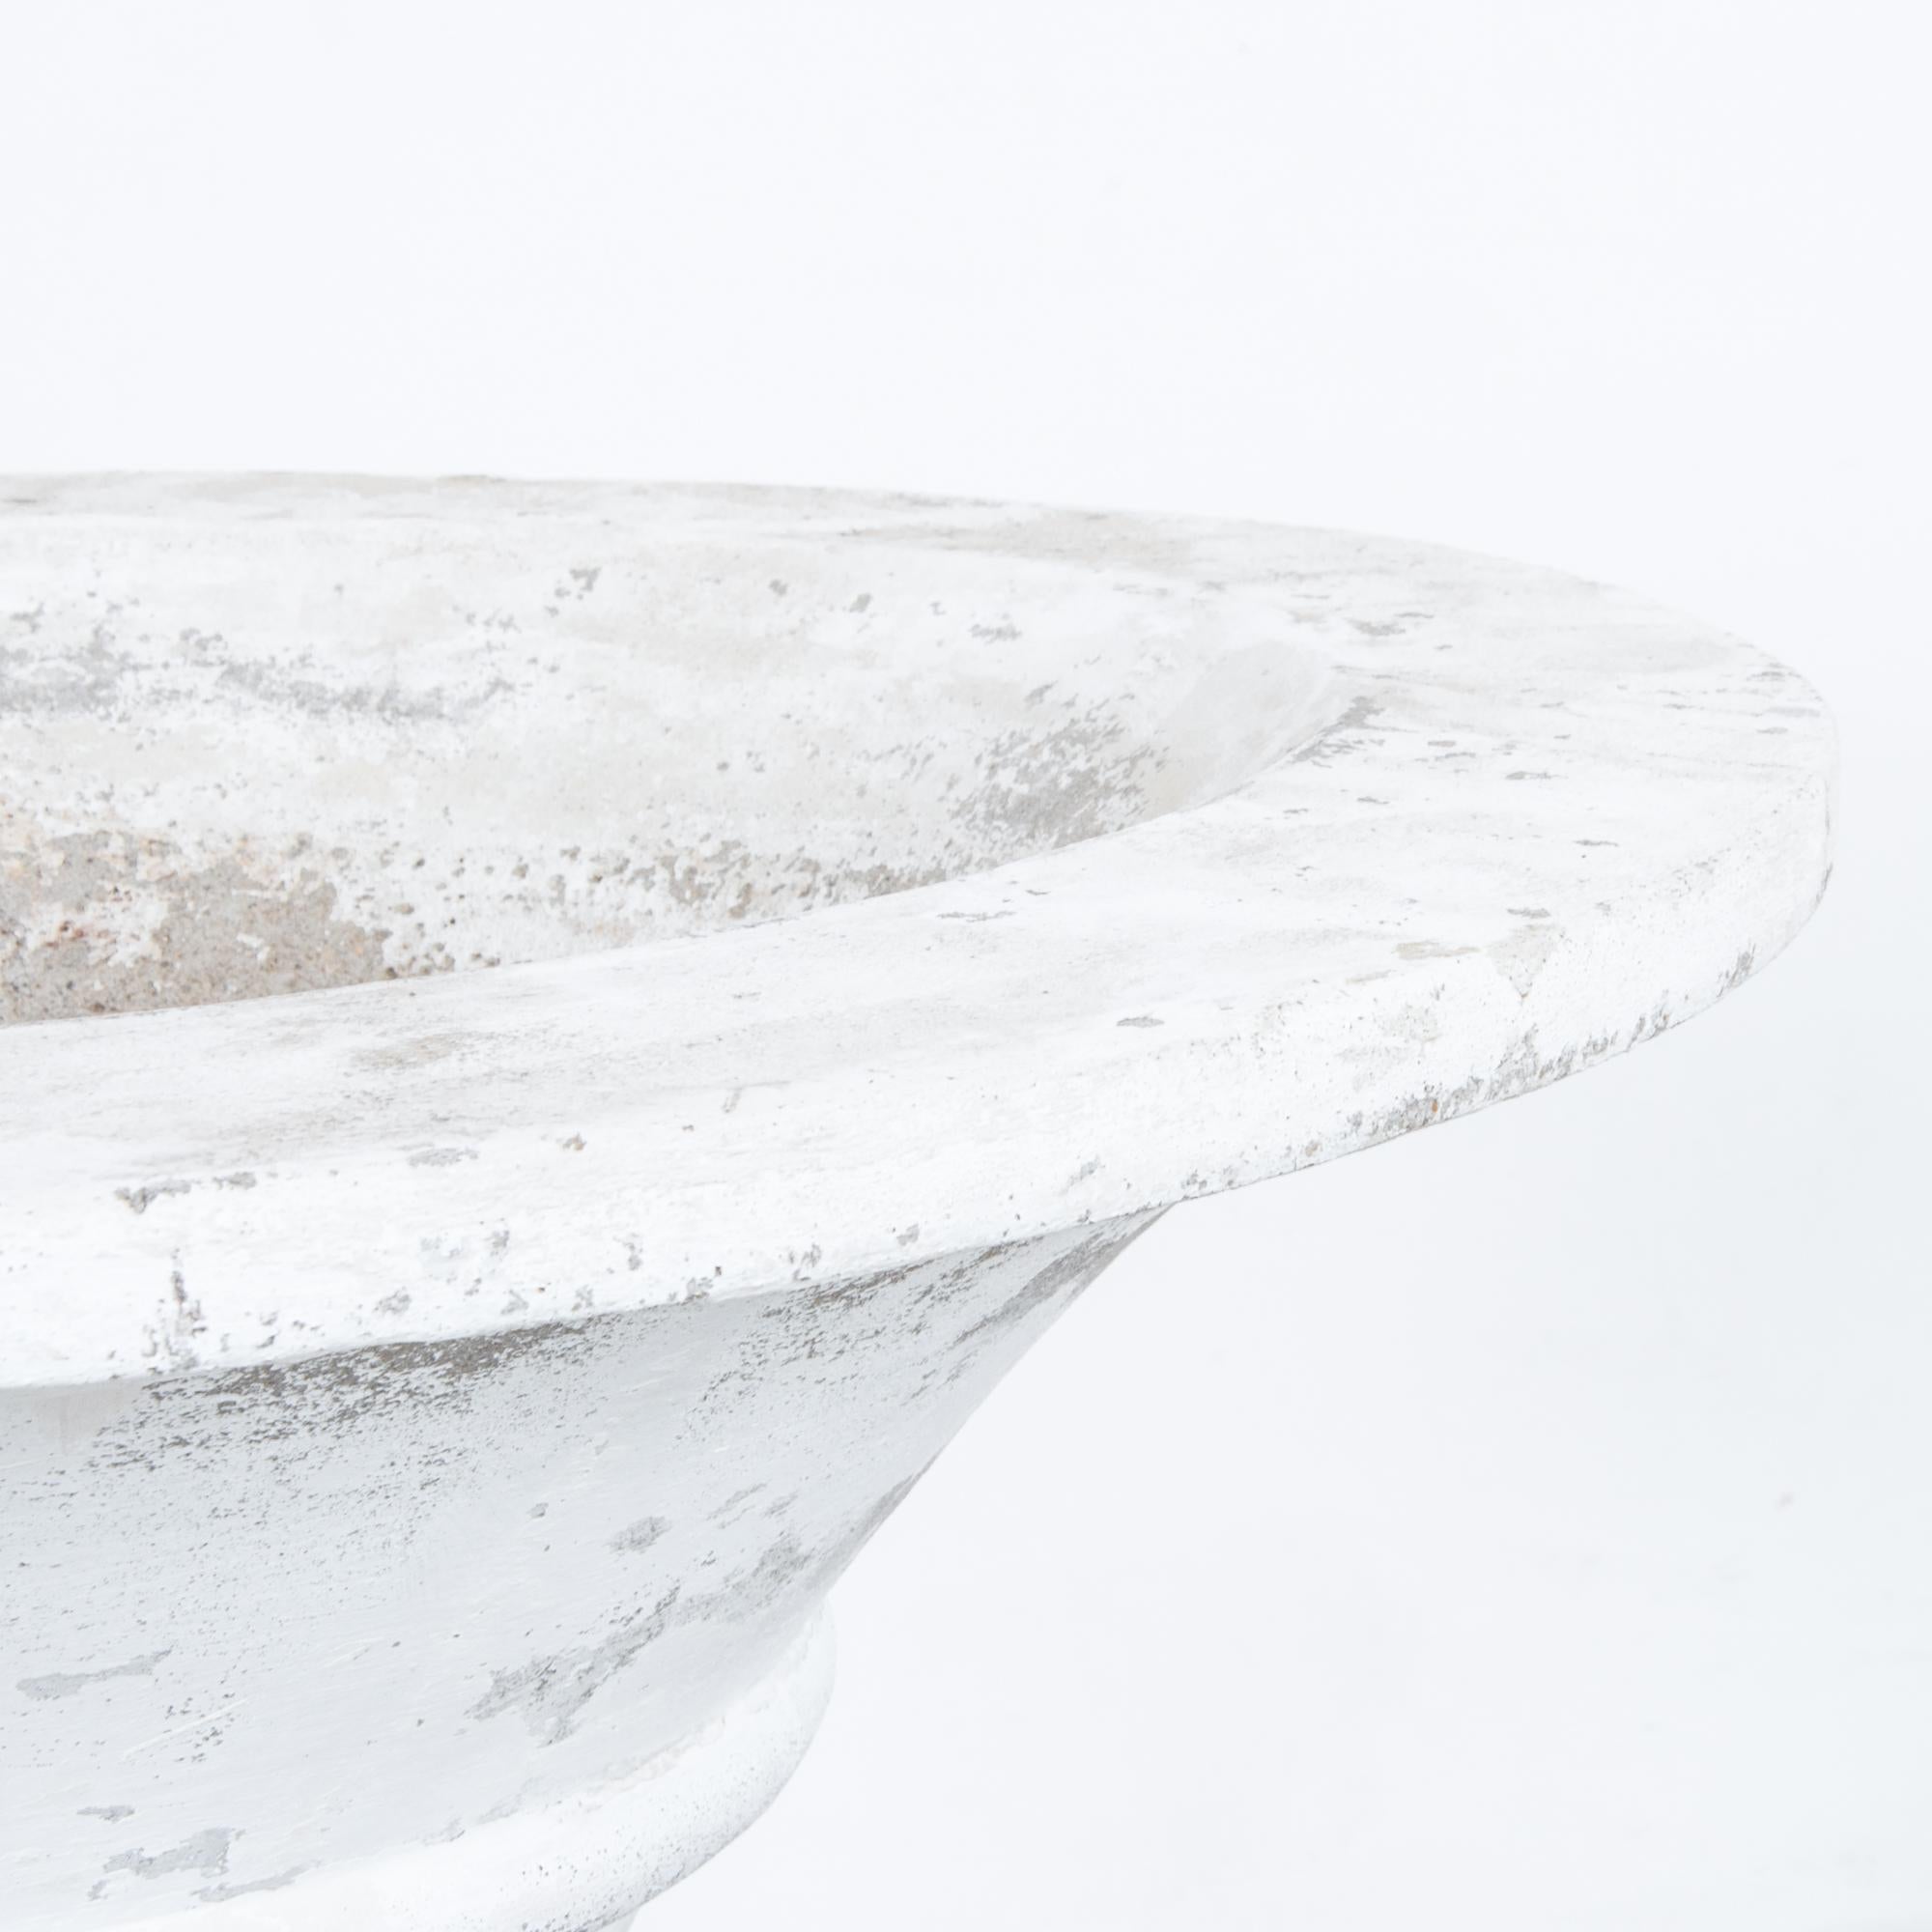 This trumpet-shaped concrete planter with a solid, circular foot was made in Belgium, circa 1960. Ribs encircling the body accentuate its pleasing curve. The distressed, white patina lends a rustic touch to the planter’s understated elegance.